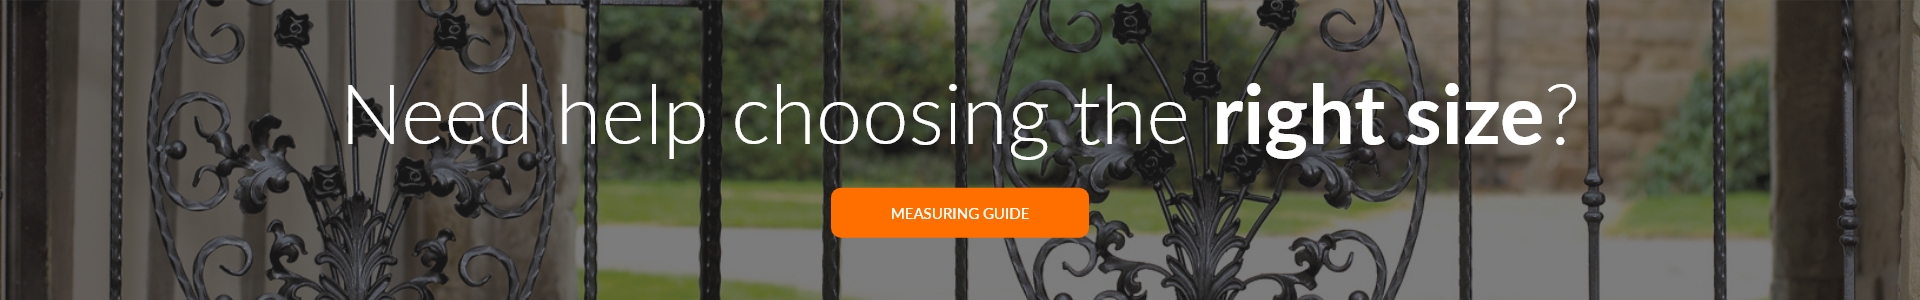 Find out how to select the right size with our measuring guide